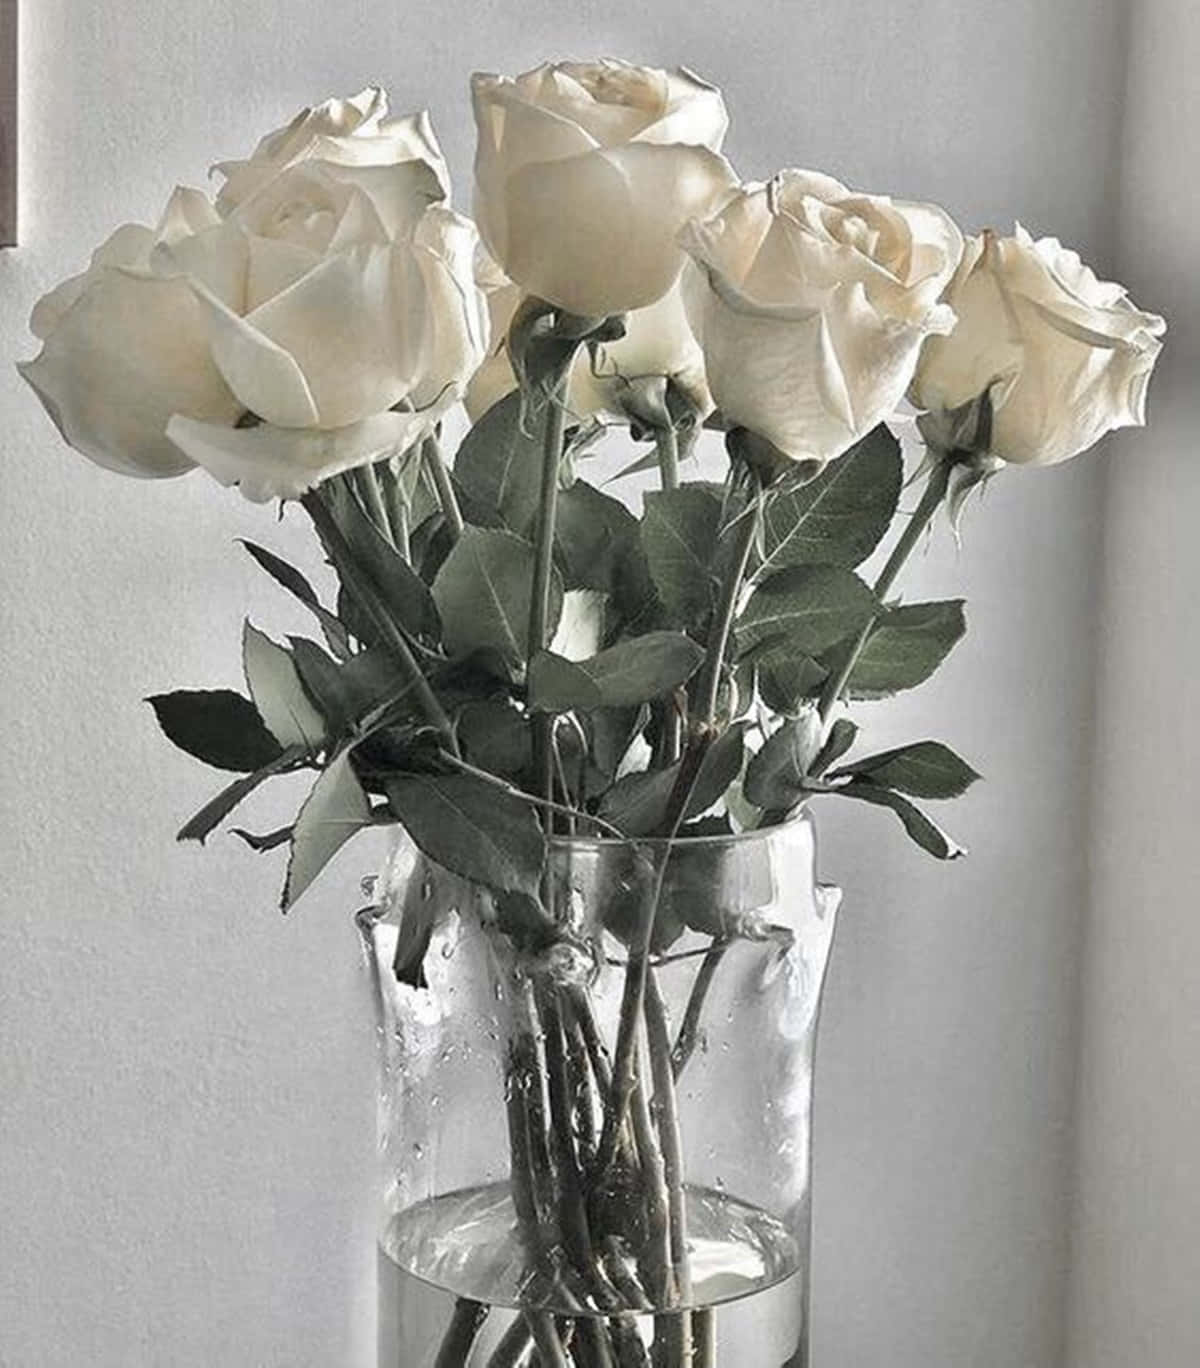 A vase of white roses sitting on a table. - Macro